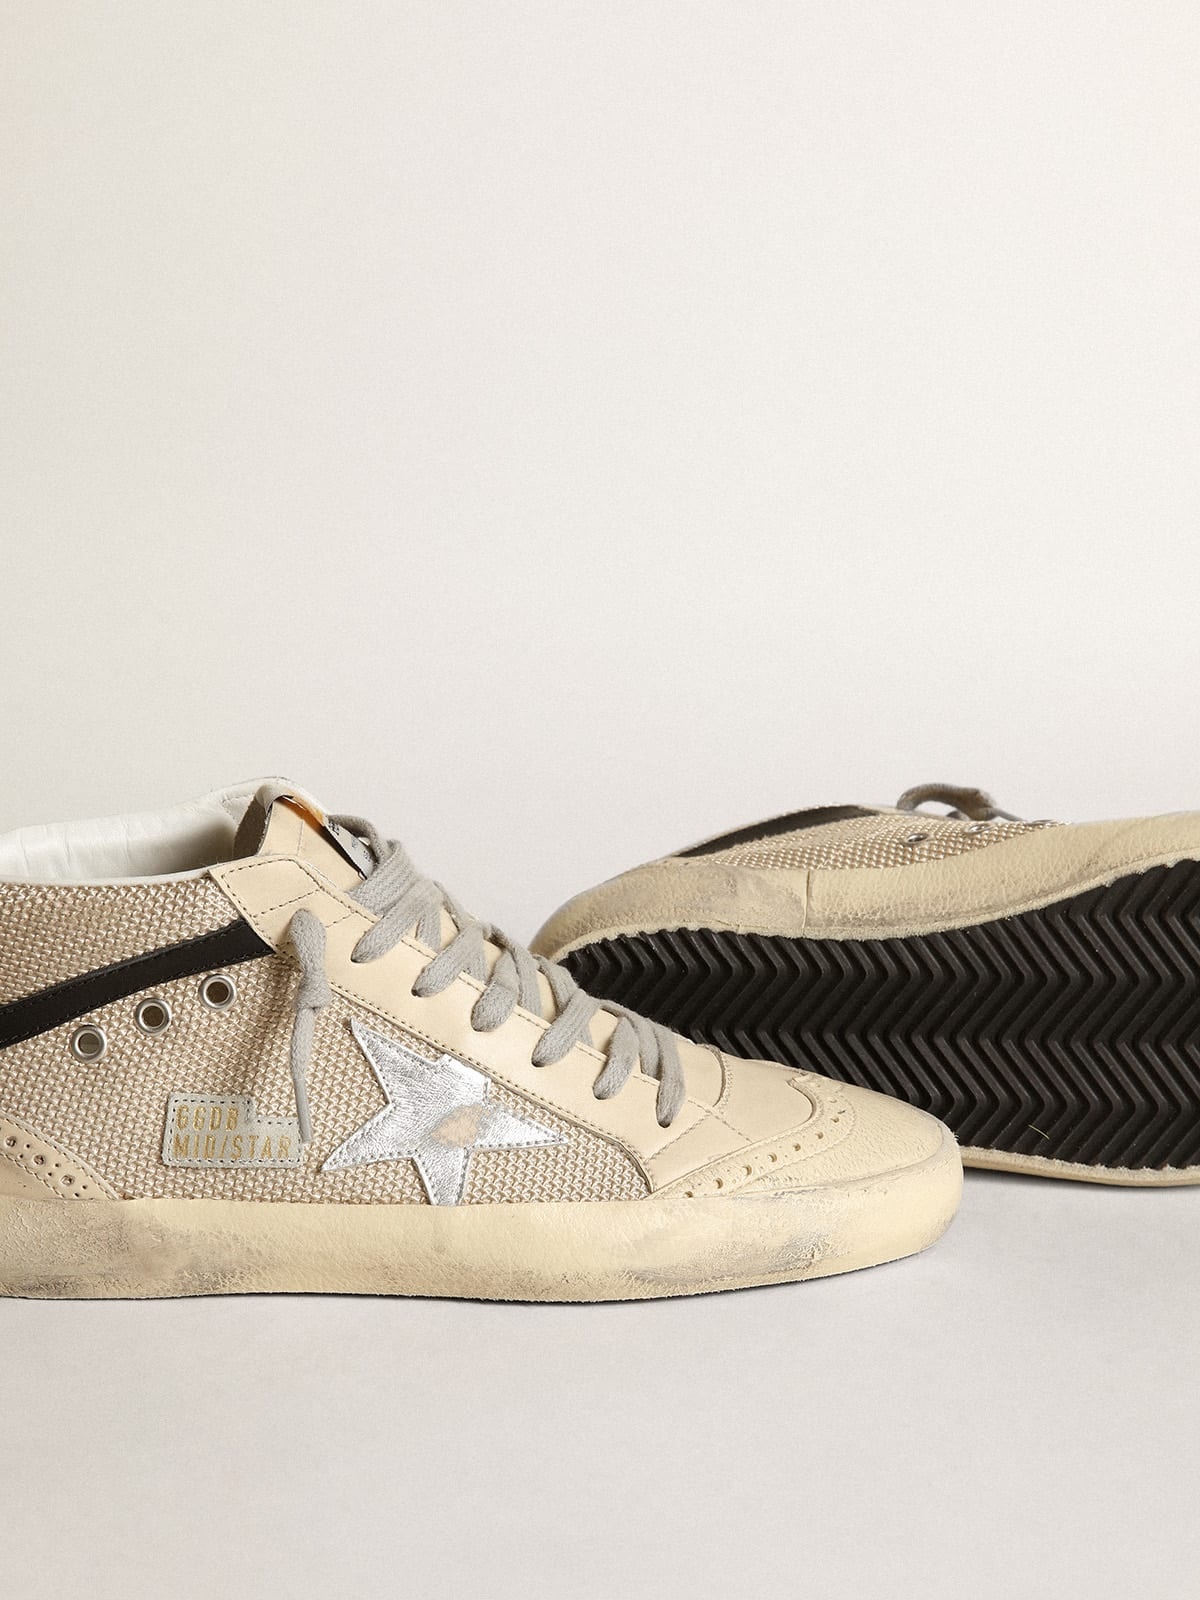 Mid Star LTD sneakers in cream-colored mesh with silver metallic leather star and black leather flas - 3